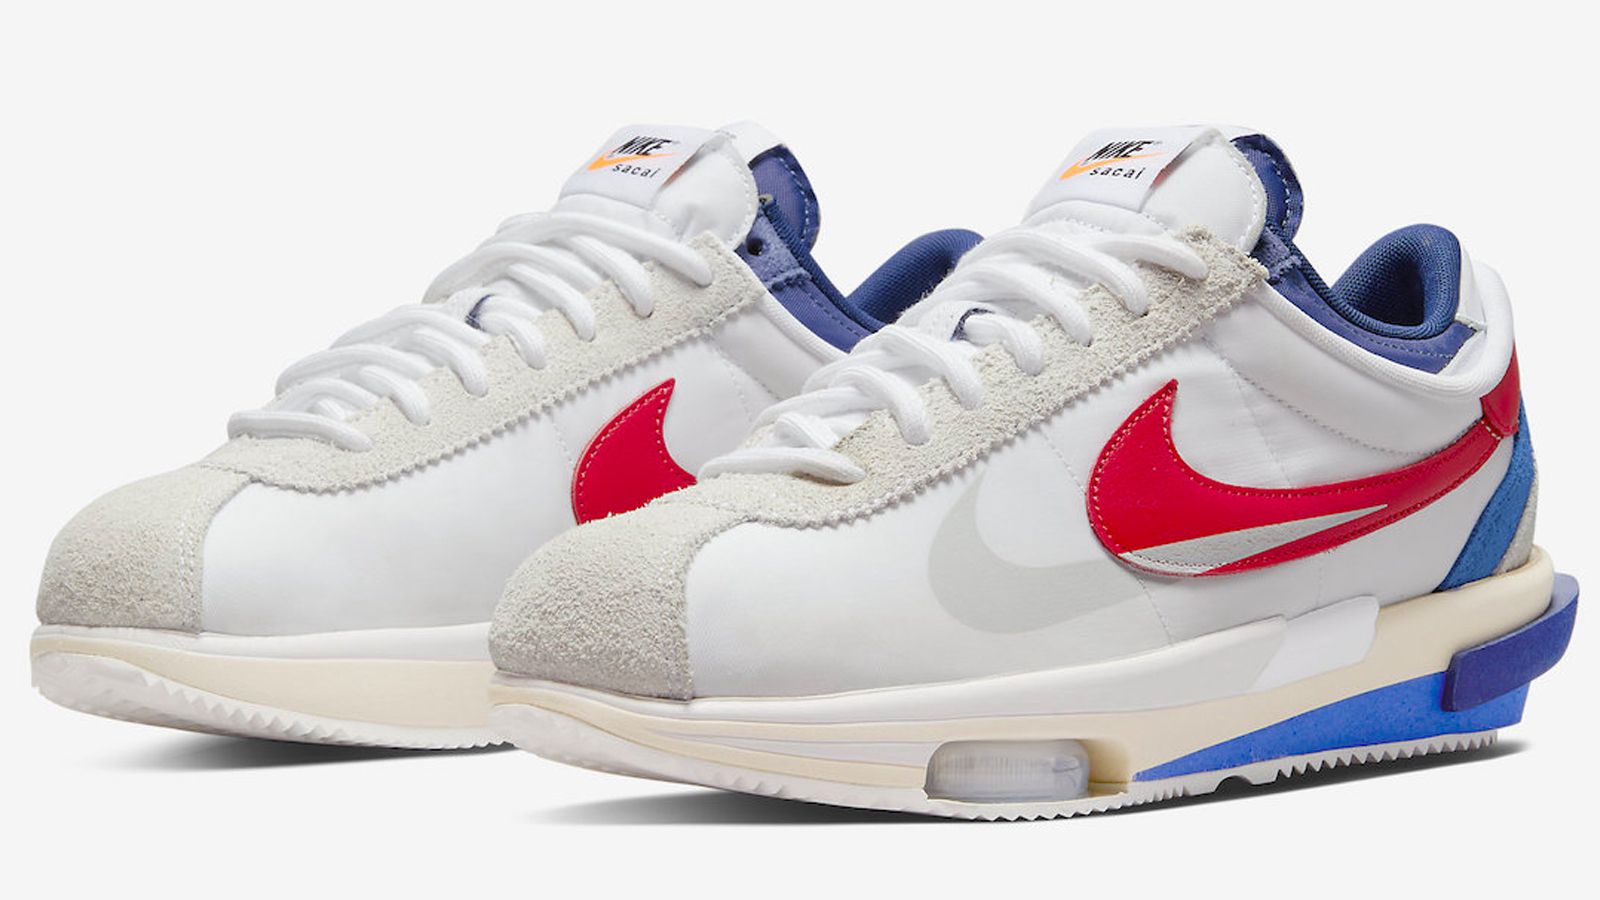 In Stock At Laced: sacai x Nike Cortez 4.0 - Laced Blog